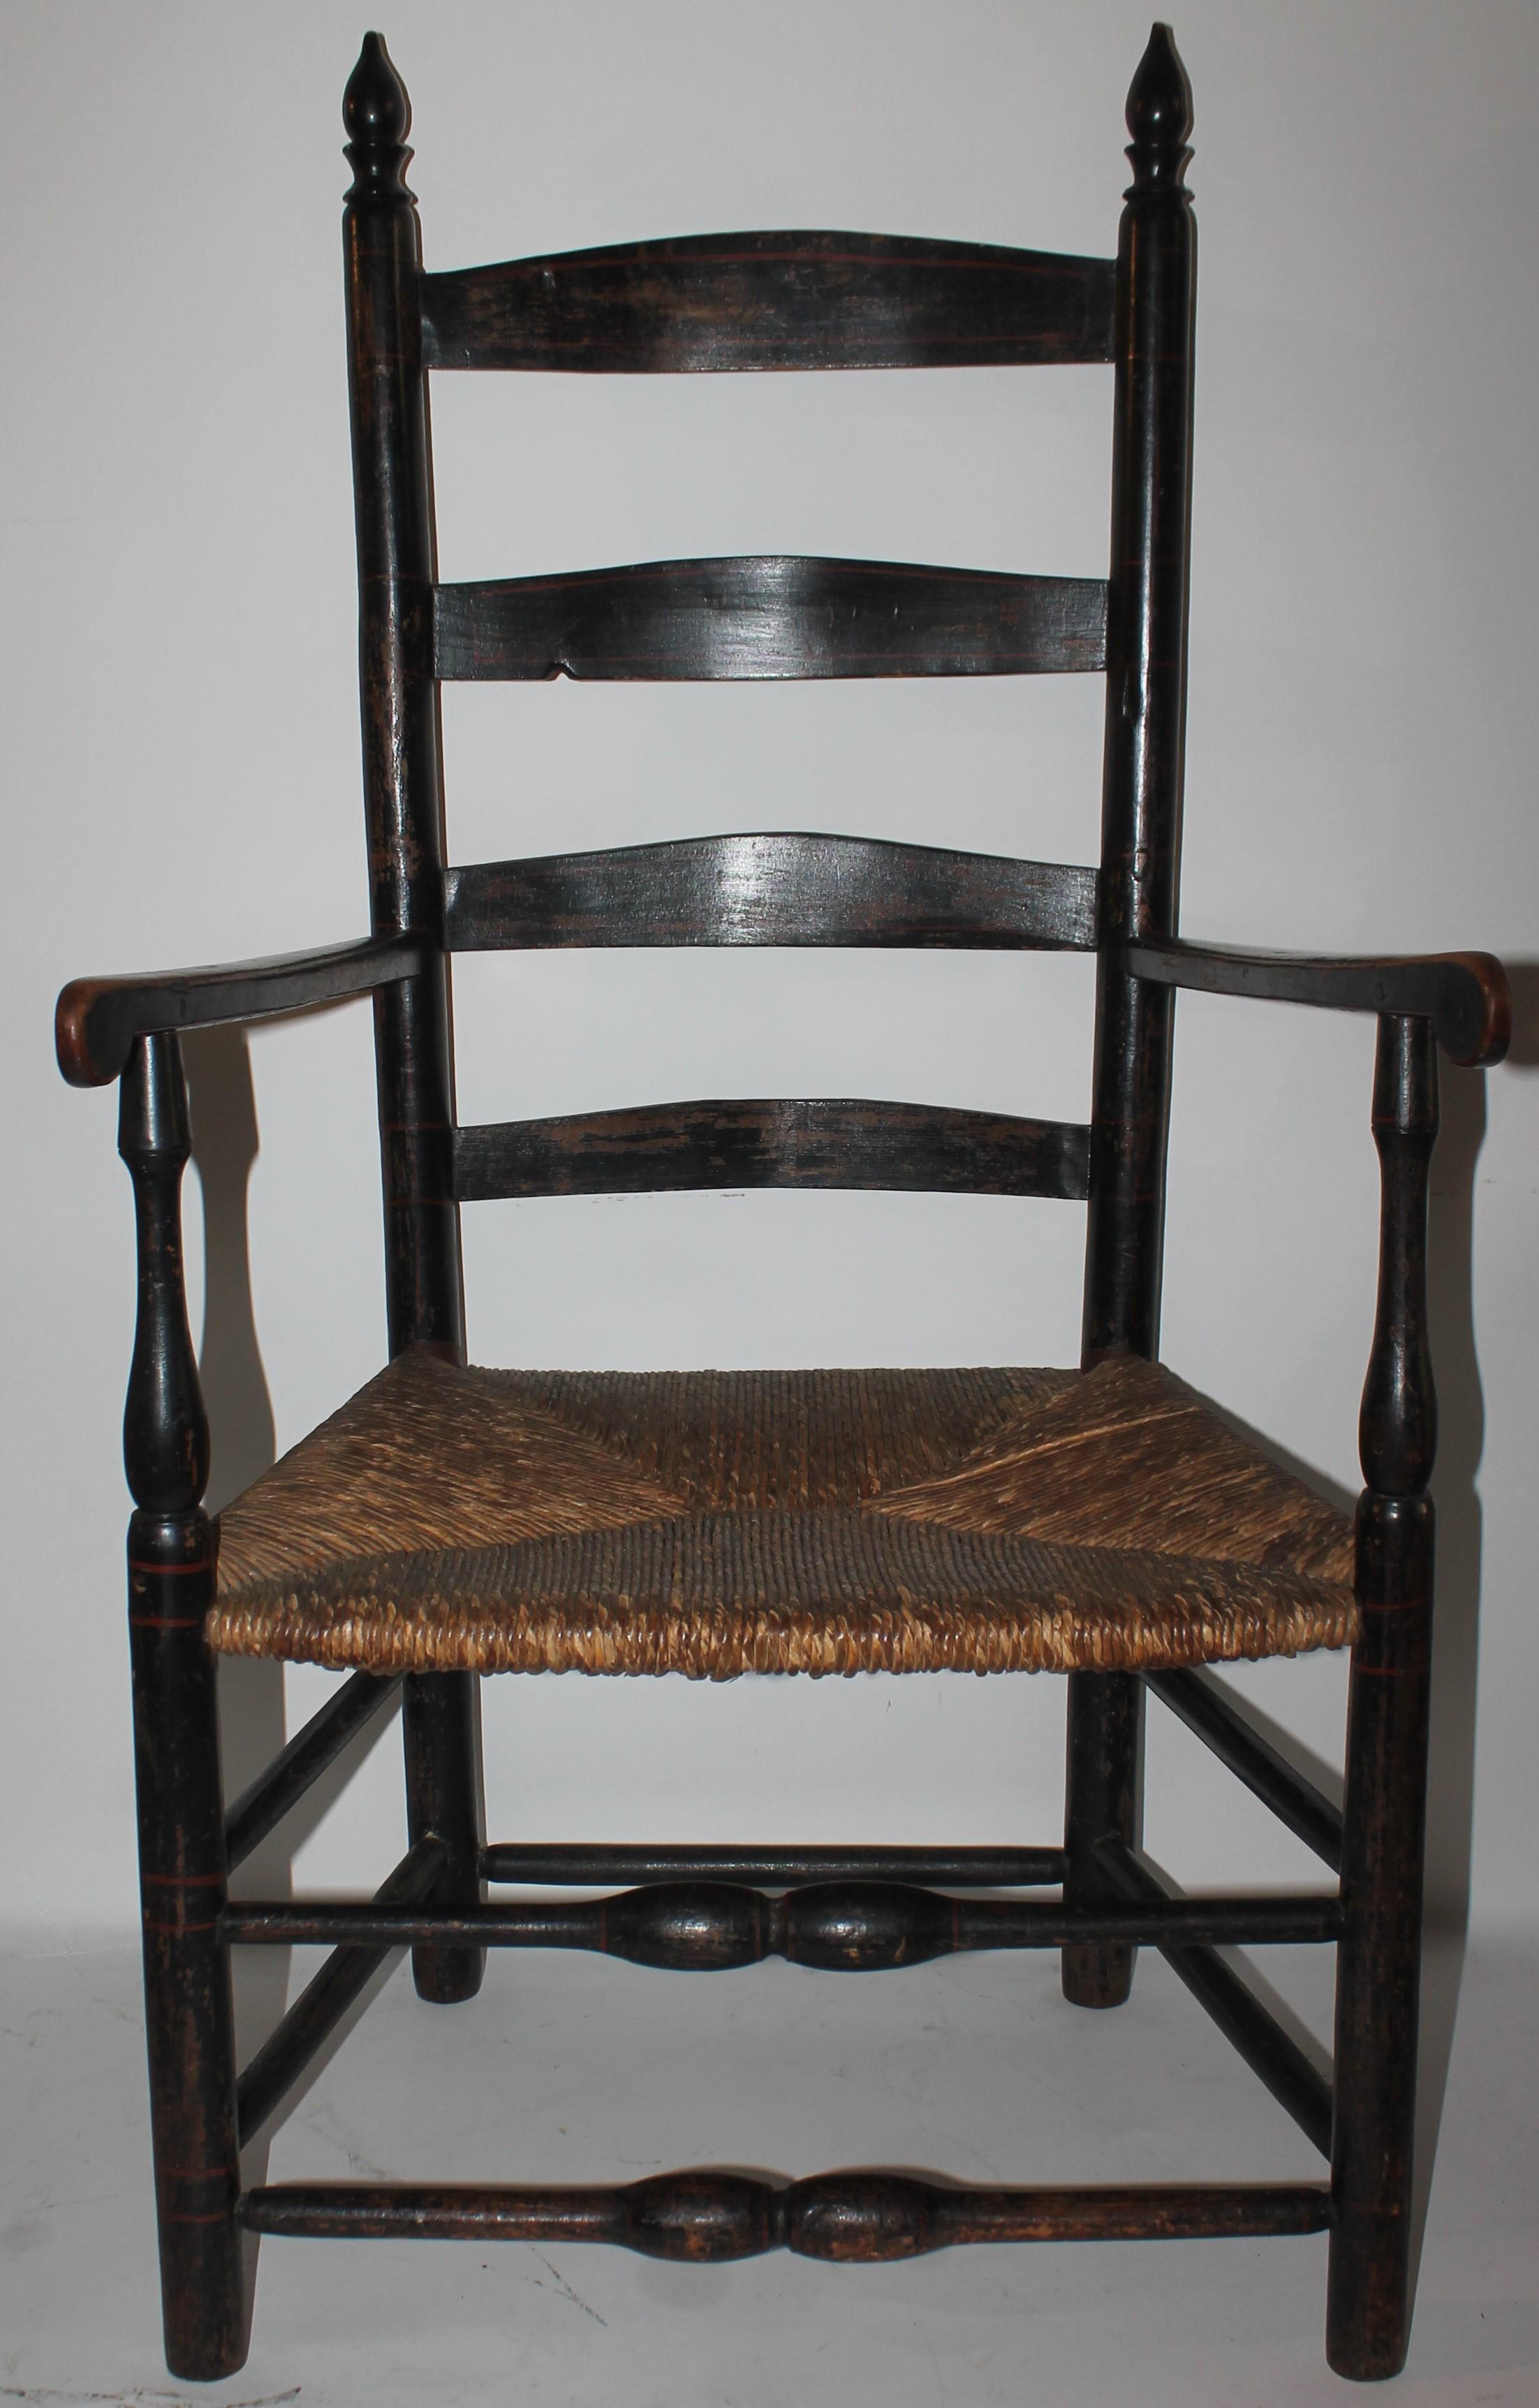 This fine hand made ladder back chair has the original rush seat and original black painted surface. The condition is very good and sturdy with a fine aged patina.